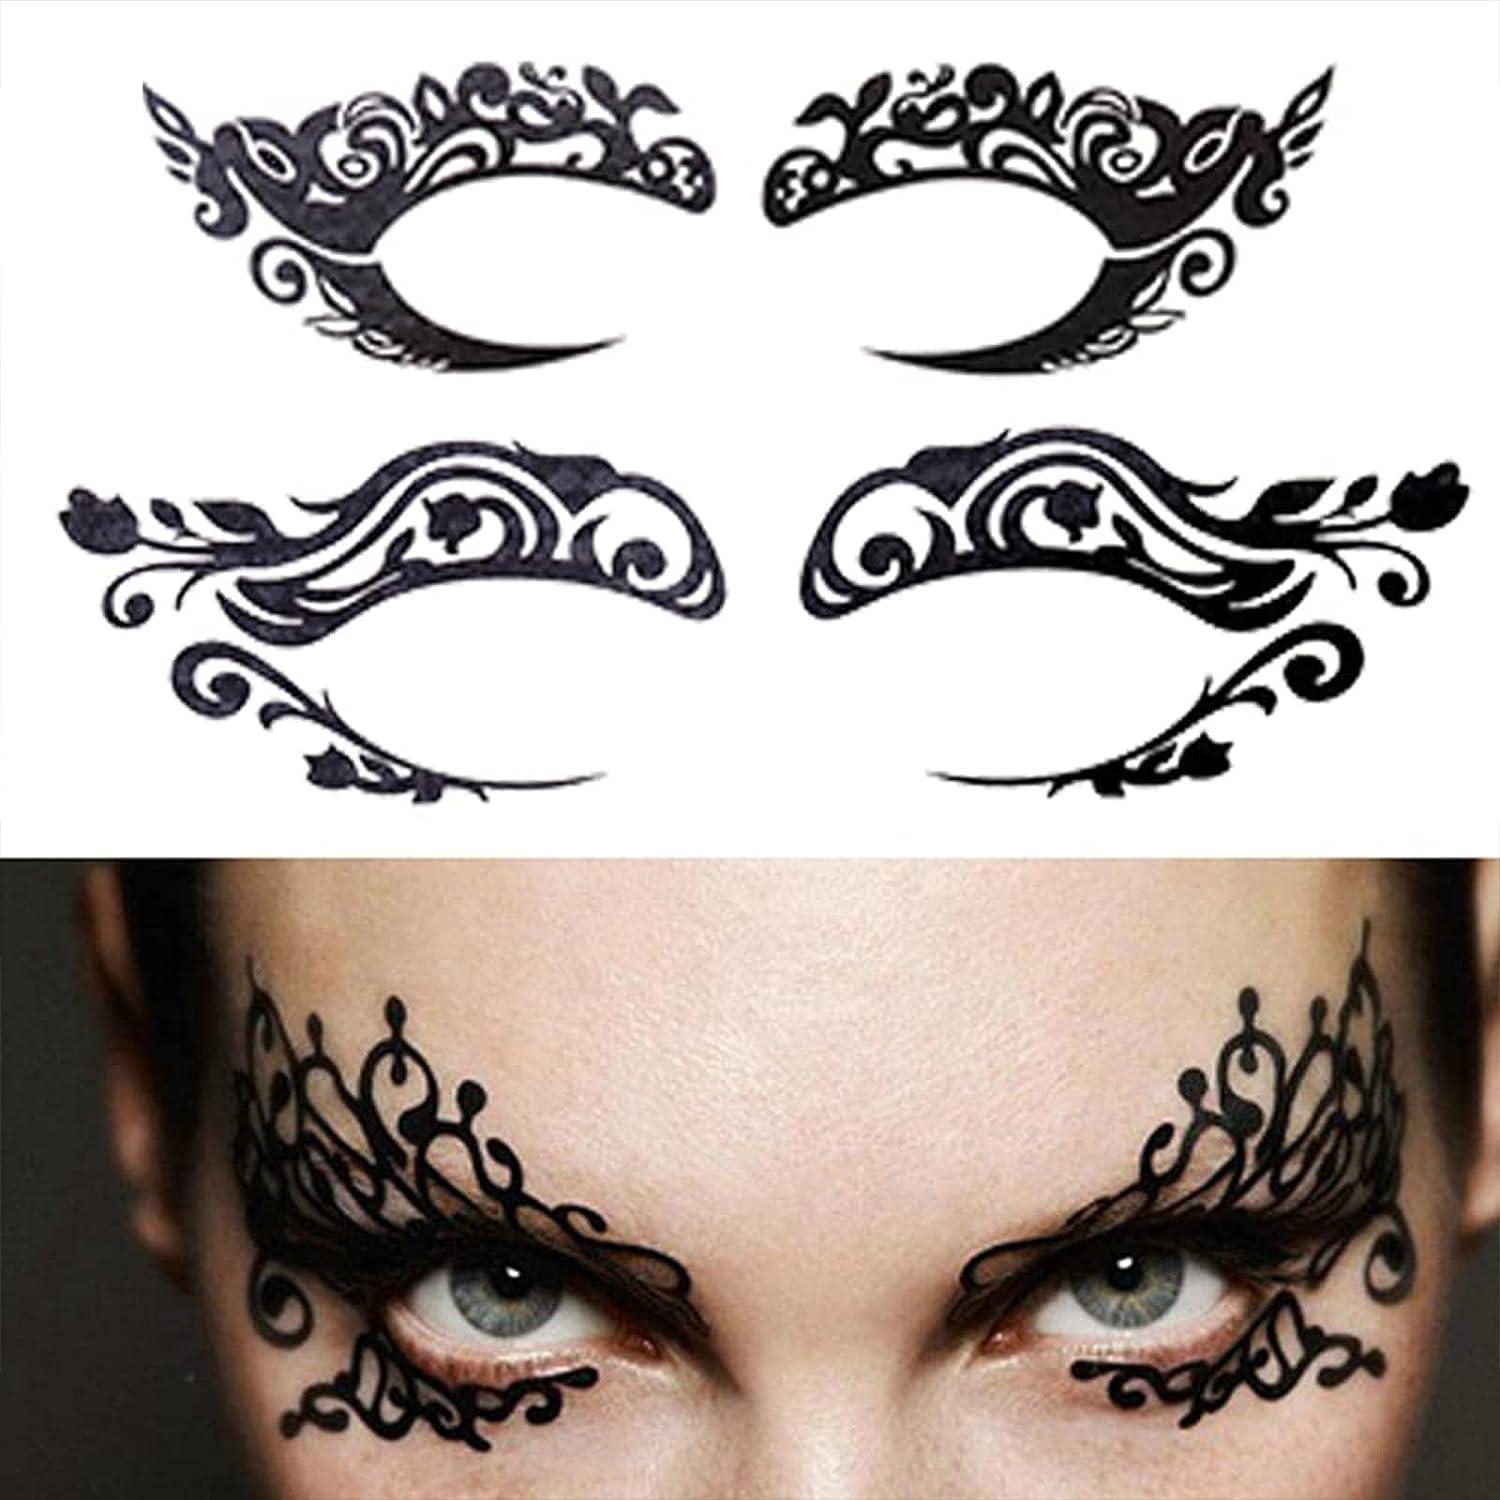 komstec Angry Eye Temporary Tattoo Stickers For Male And Female Fake Tattoo  - Price in India, Buy komstec Angry Eye Temporary Tattoo Stickers For Male  And Female Fake Tattoo Online In India,